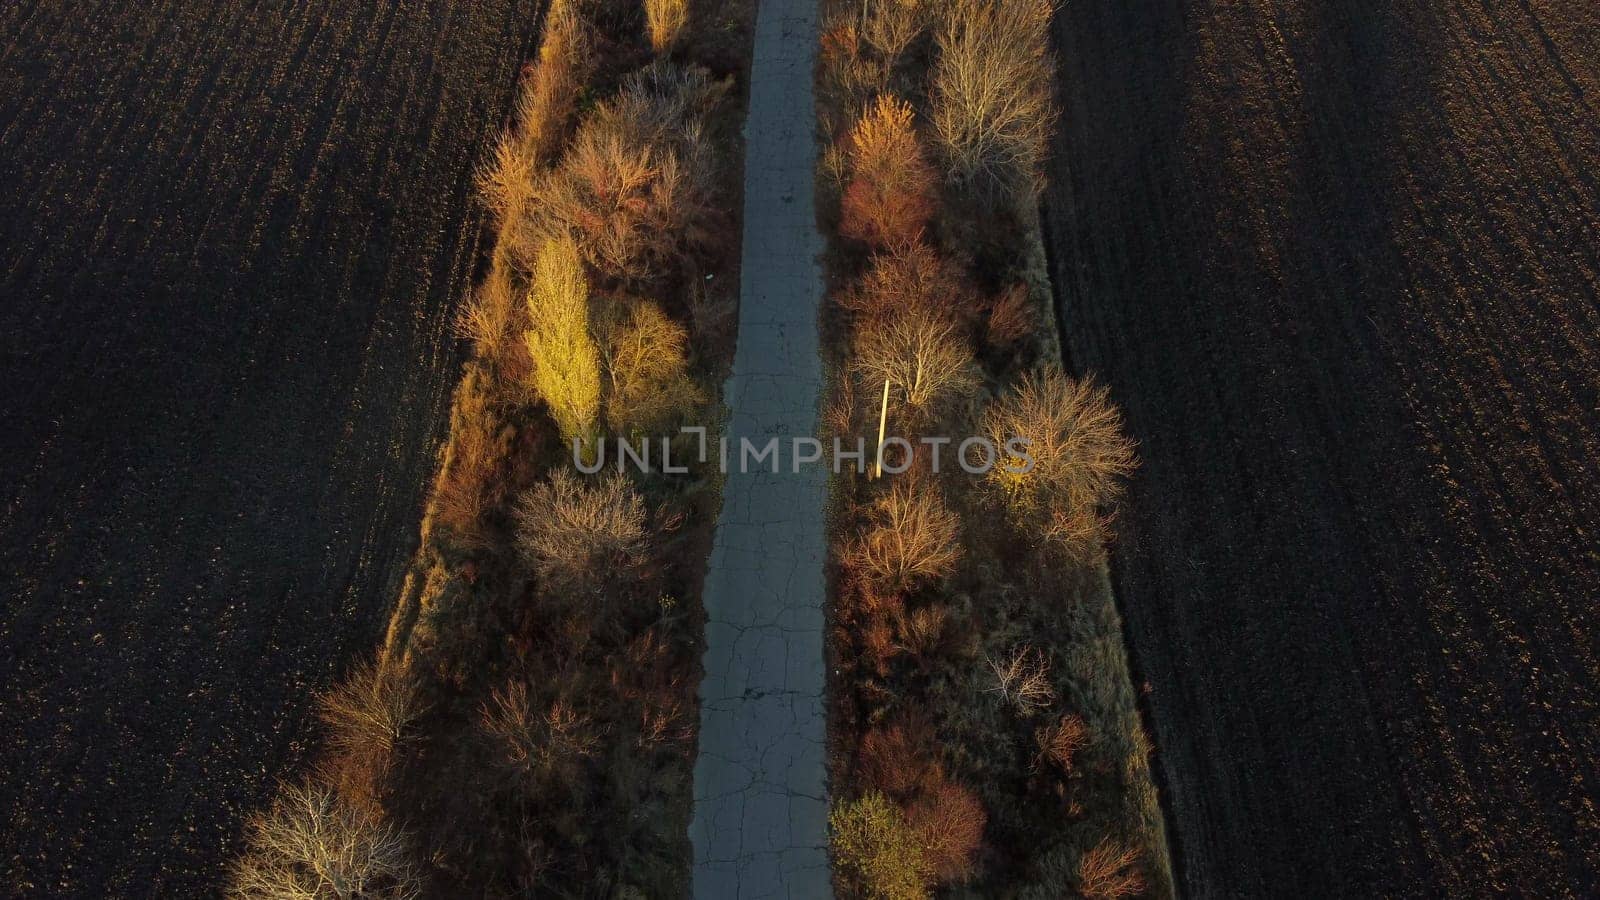 Beautiful landscape view old asphalt road with trees and shadows between large plowed agricultural fields of black soil on sunny autumn evening. Flying over dug agrarian fields of earth. Aerial drone